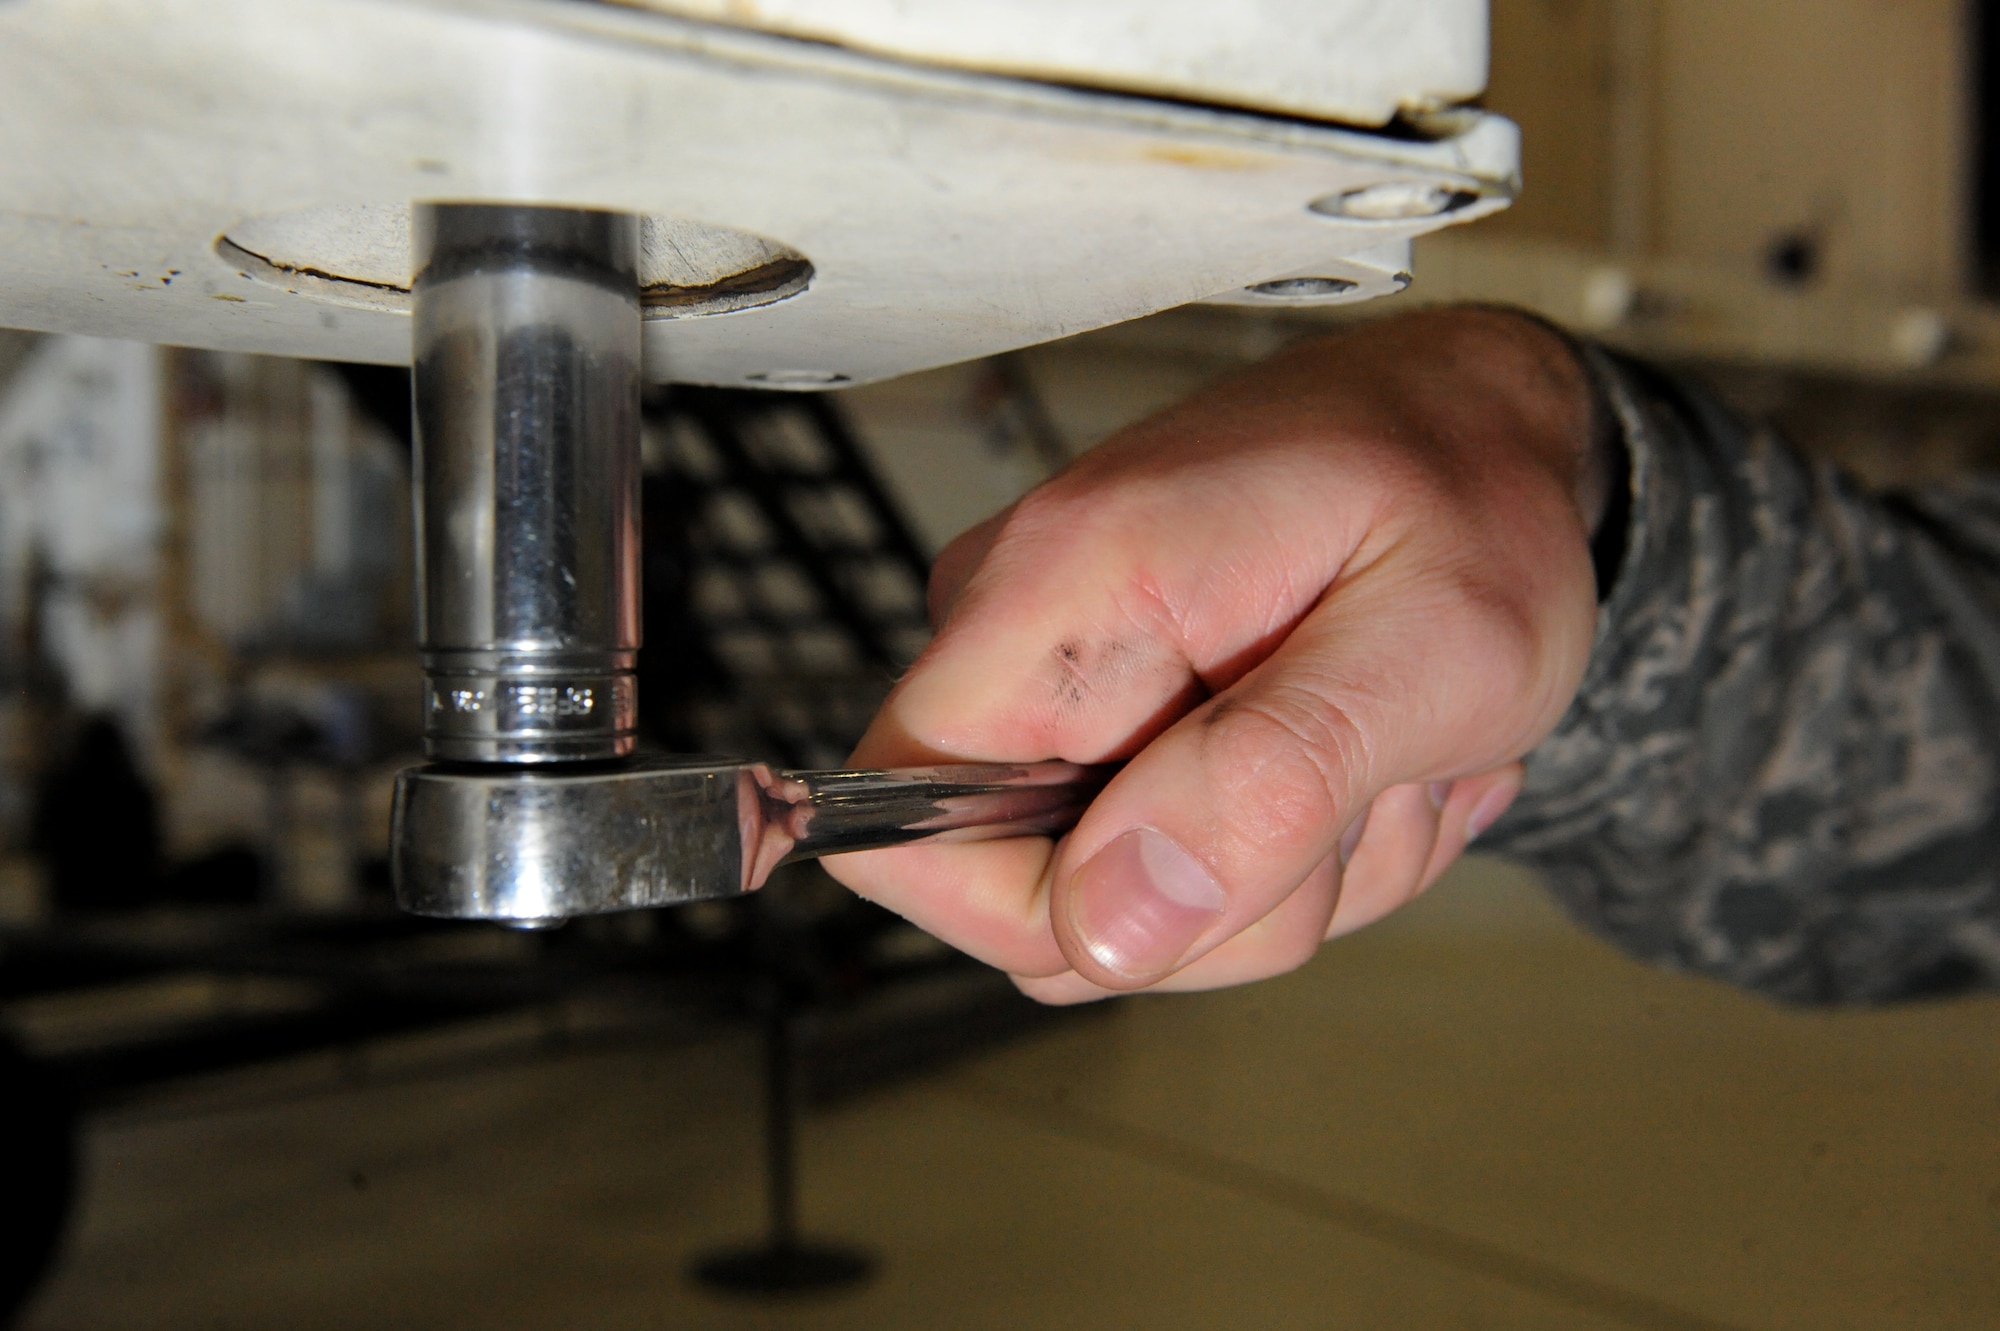 U.S. Air Force Tech Sgt. Aaron Bradley, a 393d Aircraft Maintenance Unit specialist section chief, adjusts the front landing gear of a B-2 Spirit with a socket wrench at Whiteman Air Force Base, Mo., Feb. 18, 2016. A second member, located in the cockpit, communicates with Bradley through headsets, allowing the specialists to adjust the steering of the front landing gear without turning the wheel. (U.S. Air Force photo by Tech. Sgt. Miguel Lara III)